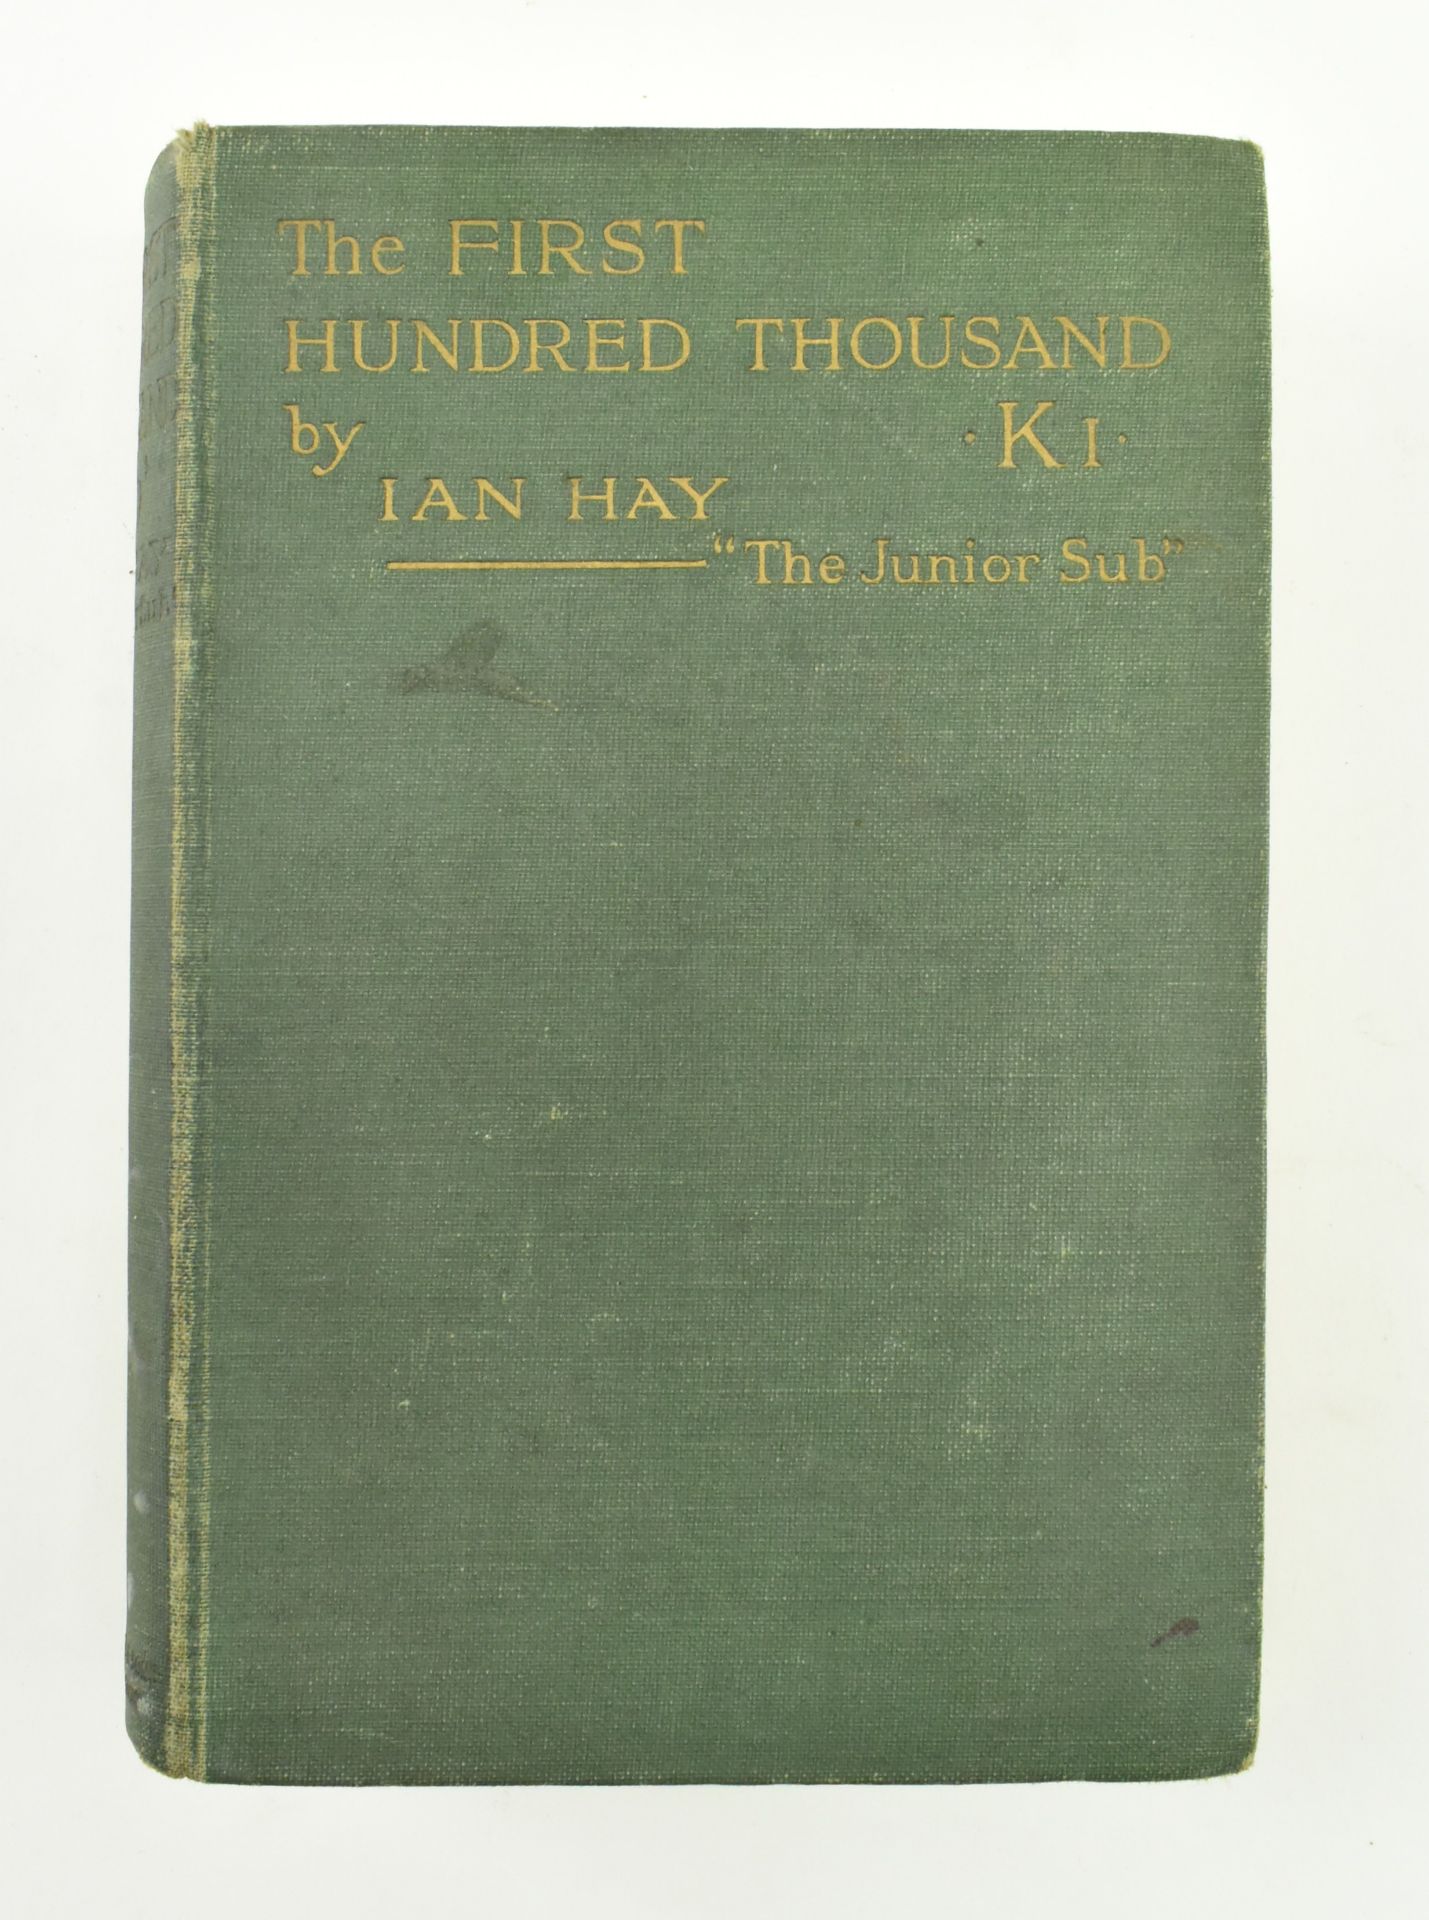 MILITARY & WW1 INTEREST. COLLECTION OF CLOTHBOUND BOOKS - Image 9 of 10